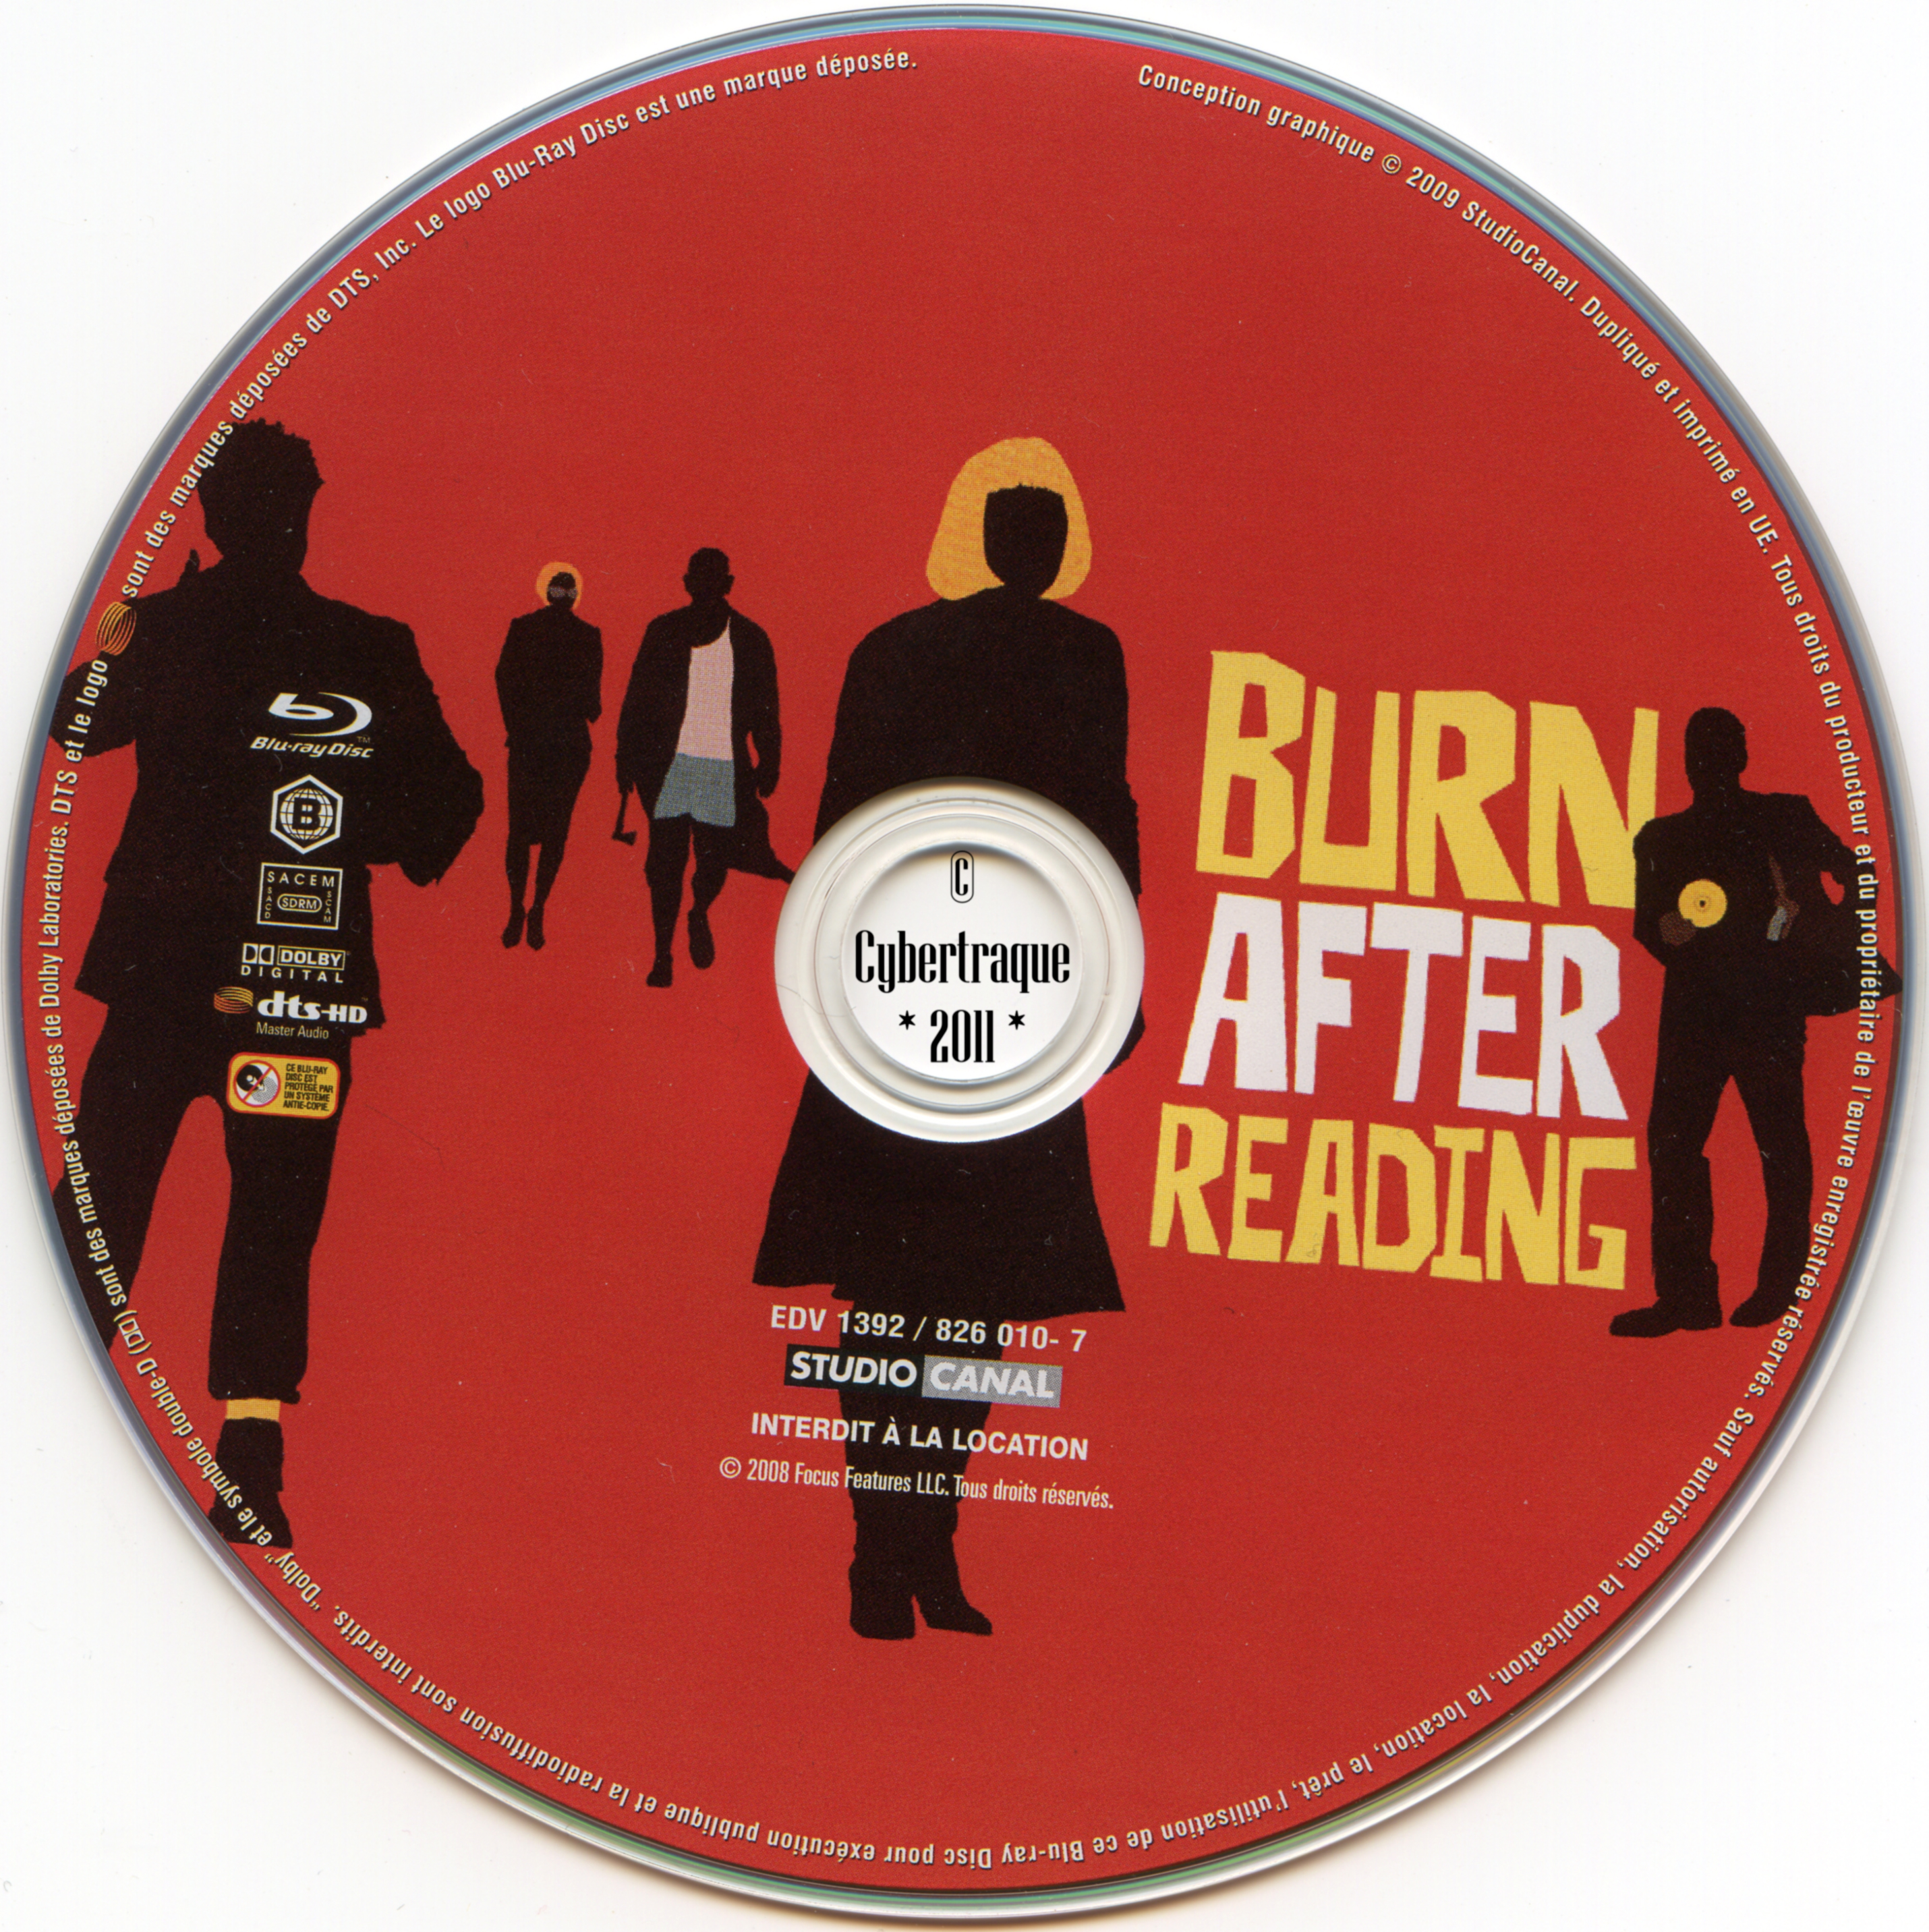 Burn after reading (BLU-RAY)